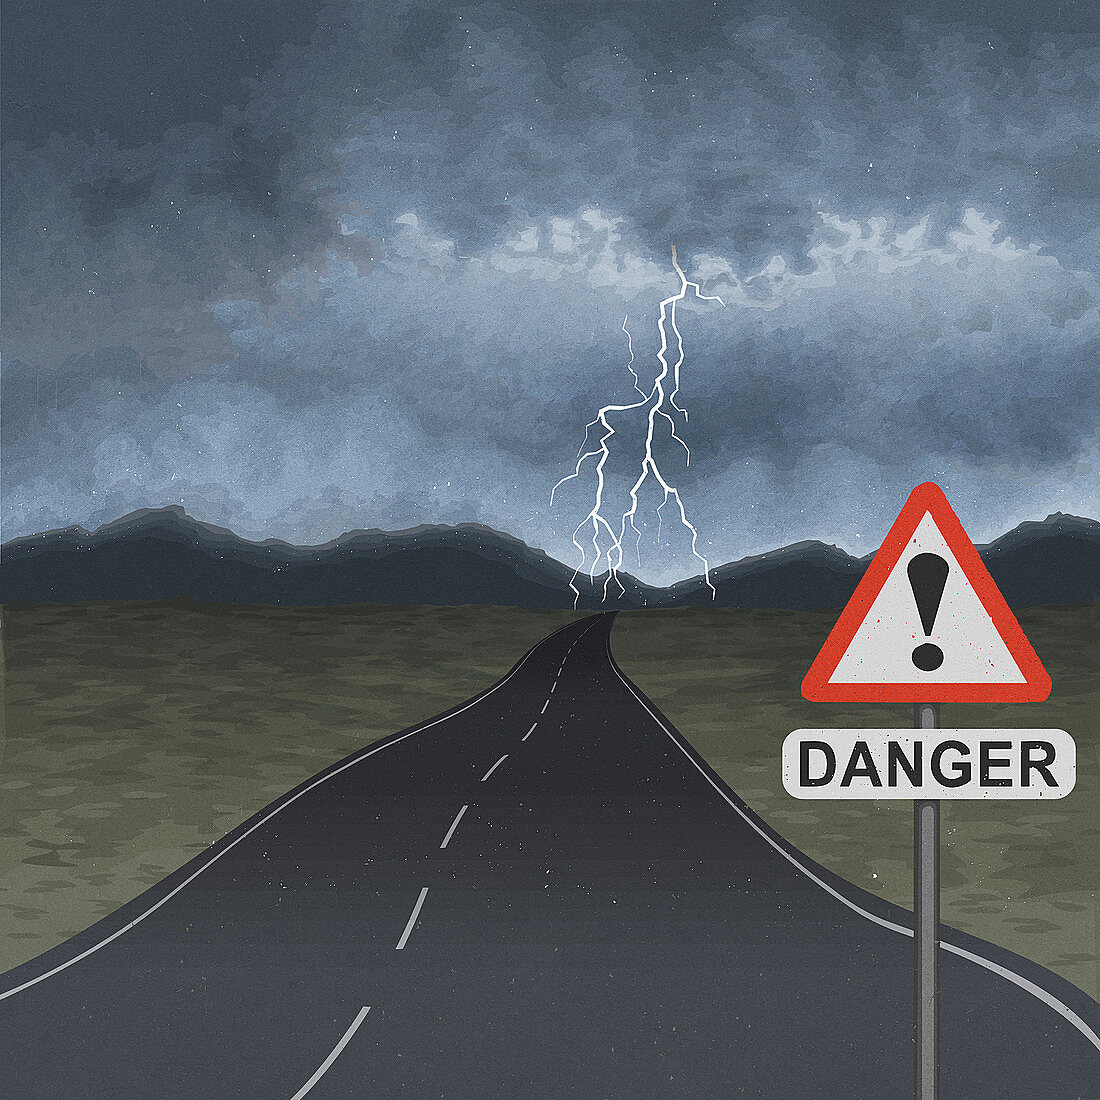 Empty road with storm ahead, illustration